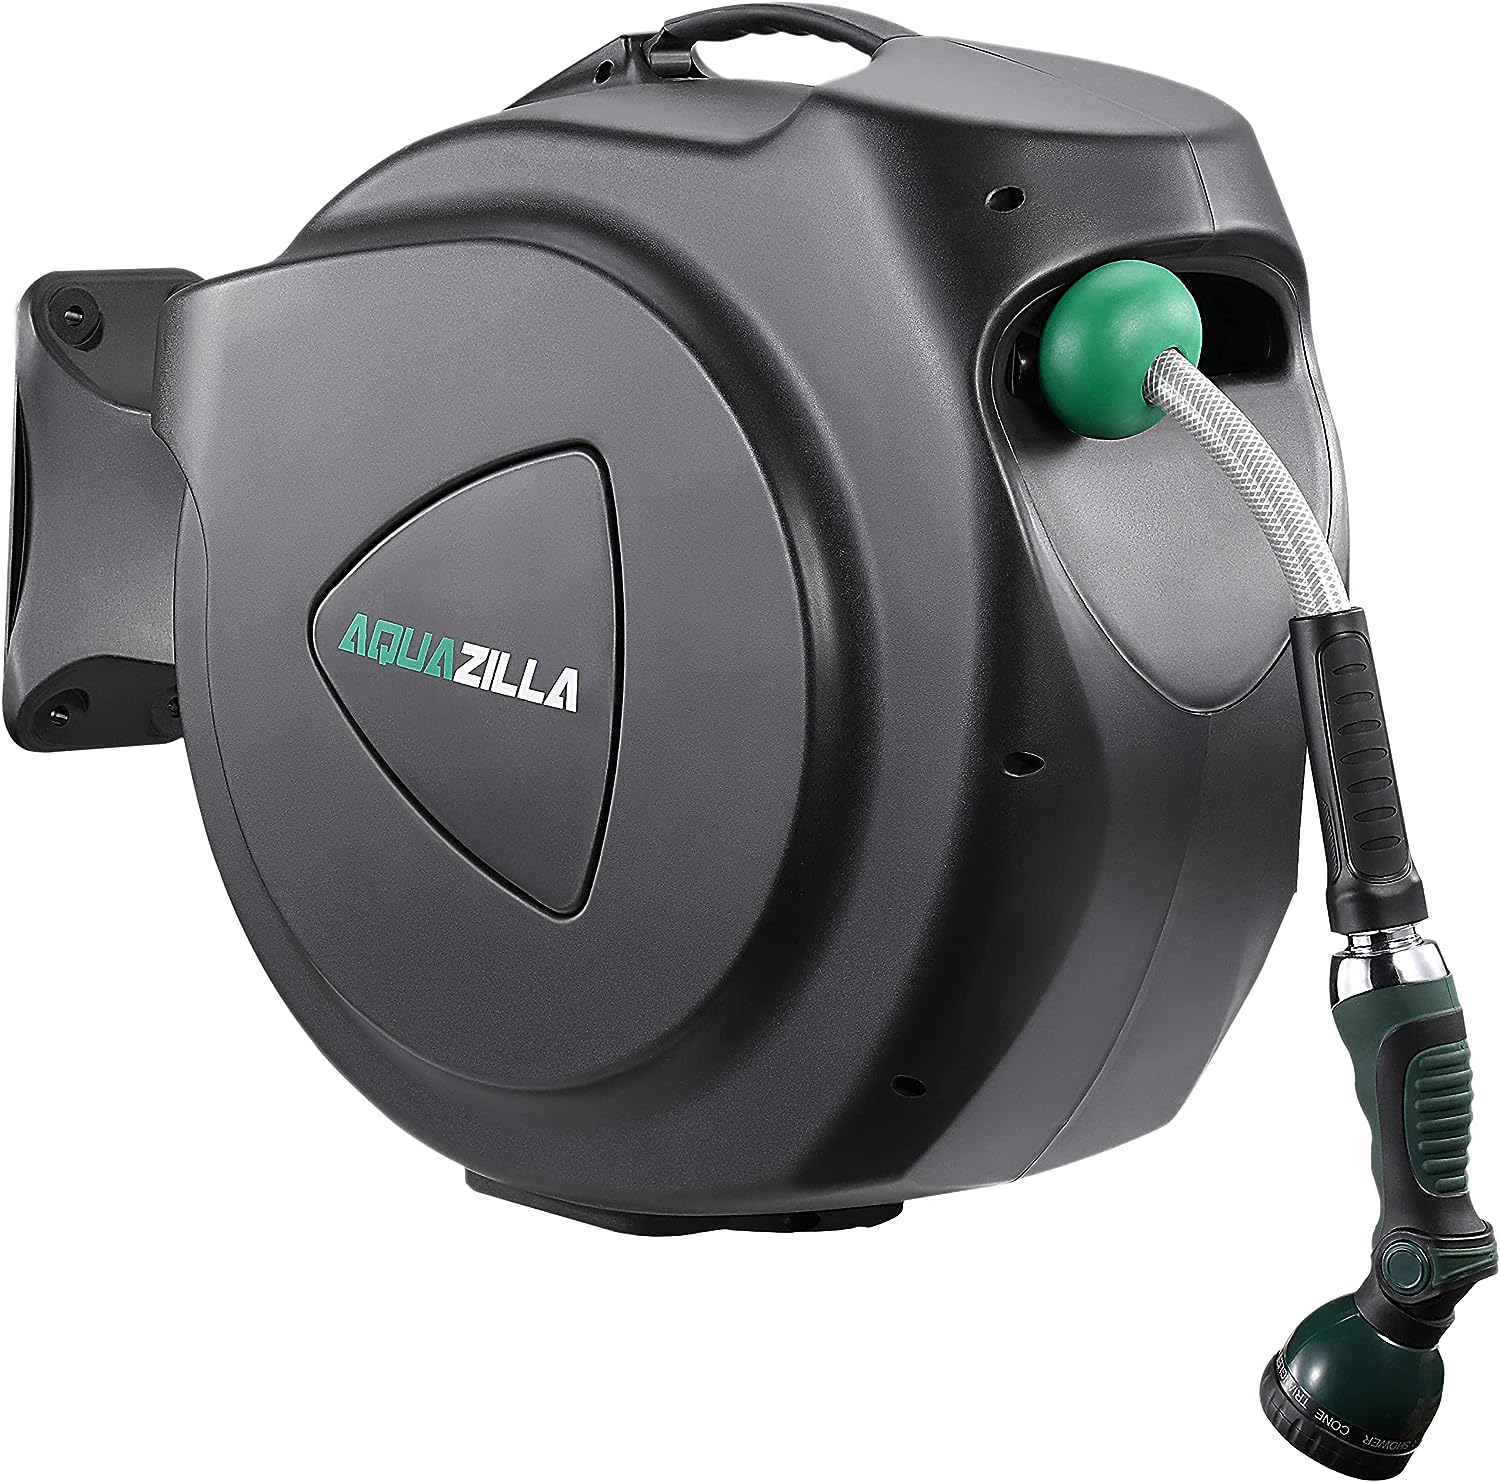 AQUAZILLA Retractable Garden Hose Reel 65FT +6FT 5/8, Durable Wall Mounted  Water Hose Reel- Smooth Automatic Rewind, Lock Hose in Any Lenght, 180°  Swival Bracket, 9 Pattern Sprayer.